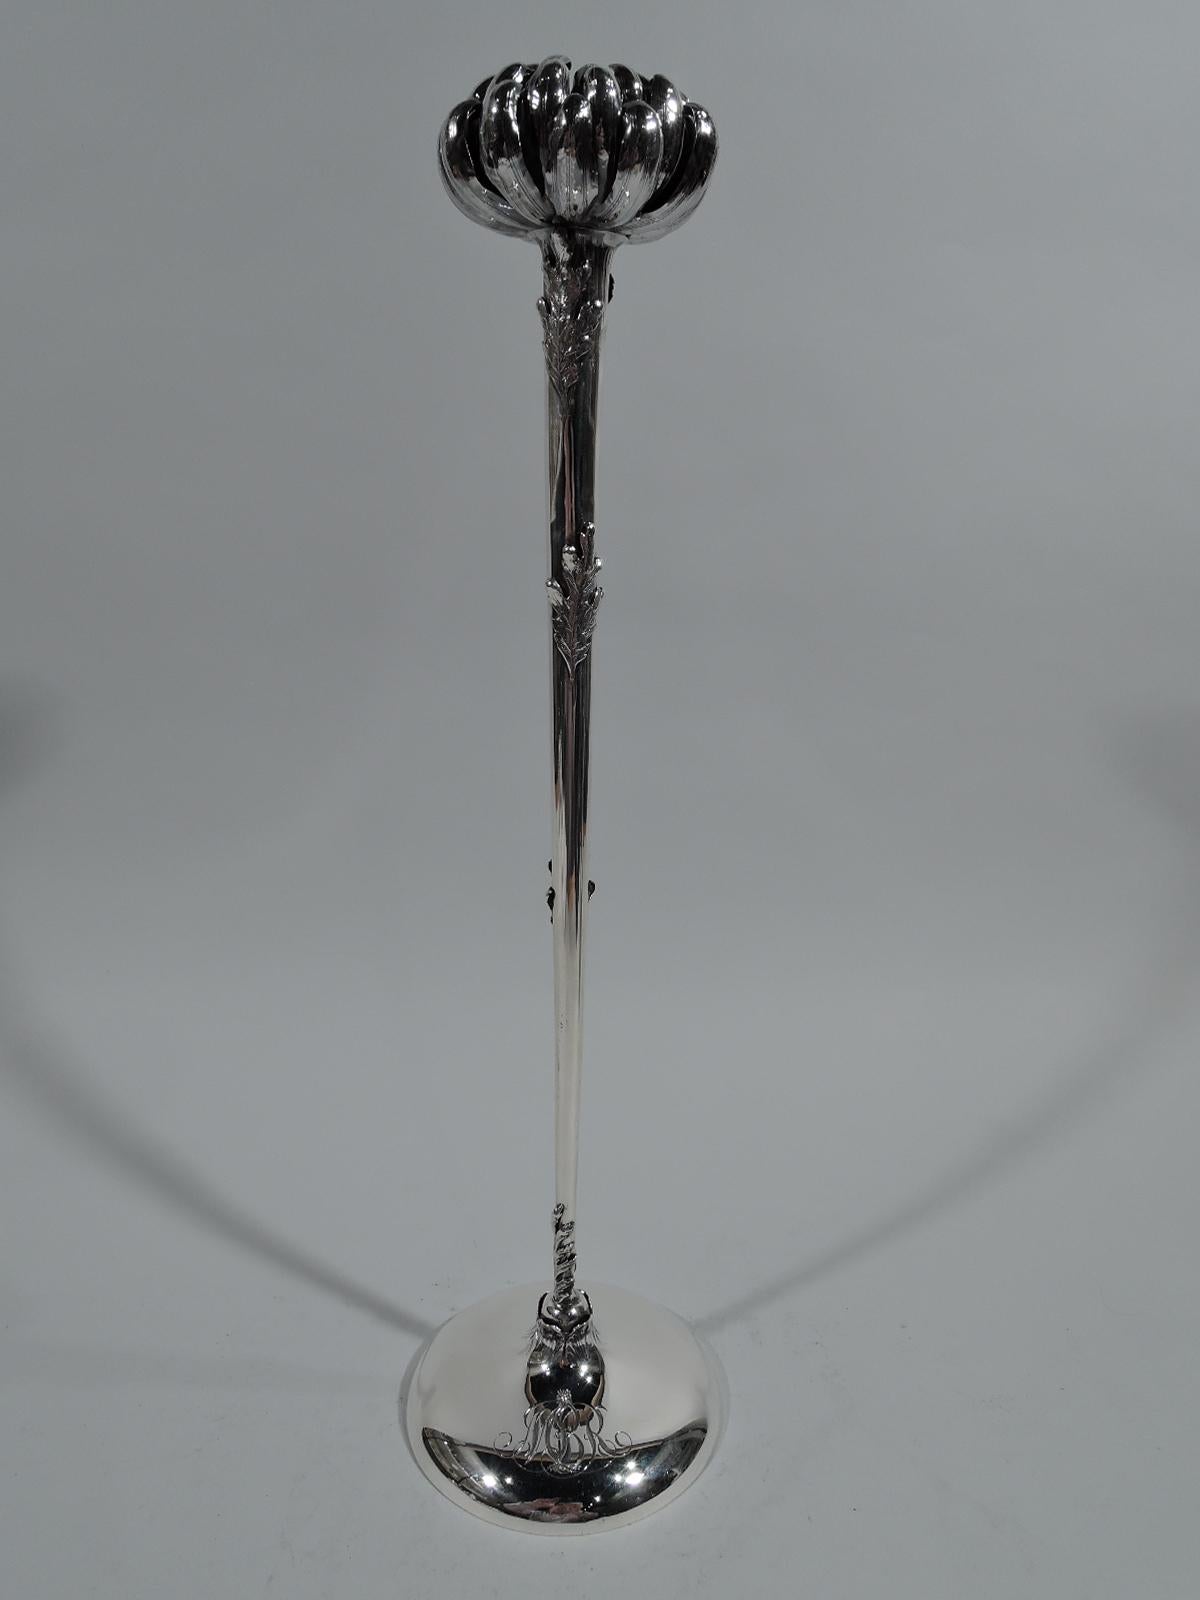 Aesthetic sterling silver vase, circa 1900. Tall and slender leaf-wrapped shooting stem shaft and chrysanthemum-form mouth with dense and tight petals. There’s room for one very rarified flower, or the vase can be appreciated all on its own as a